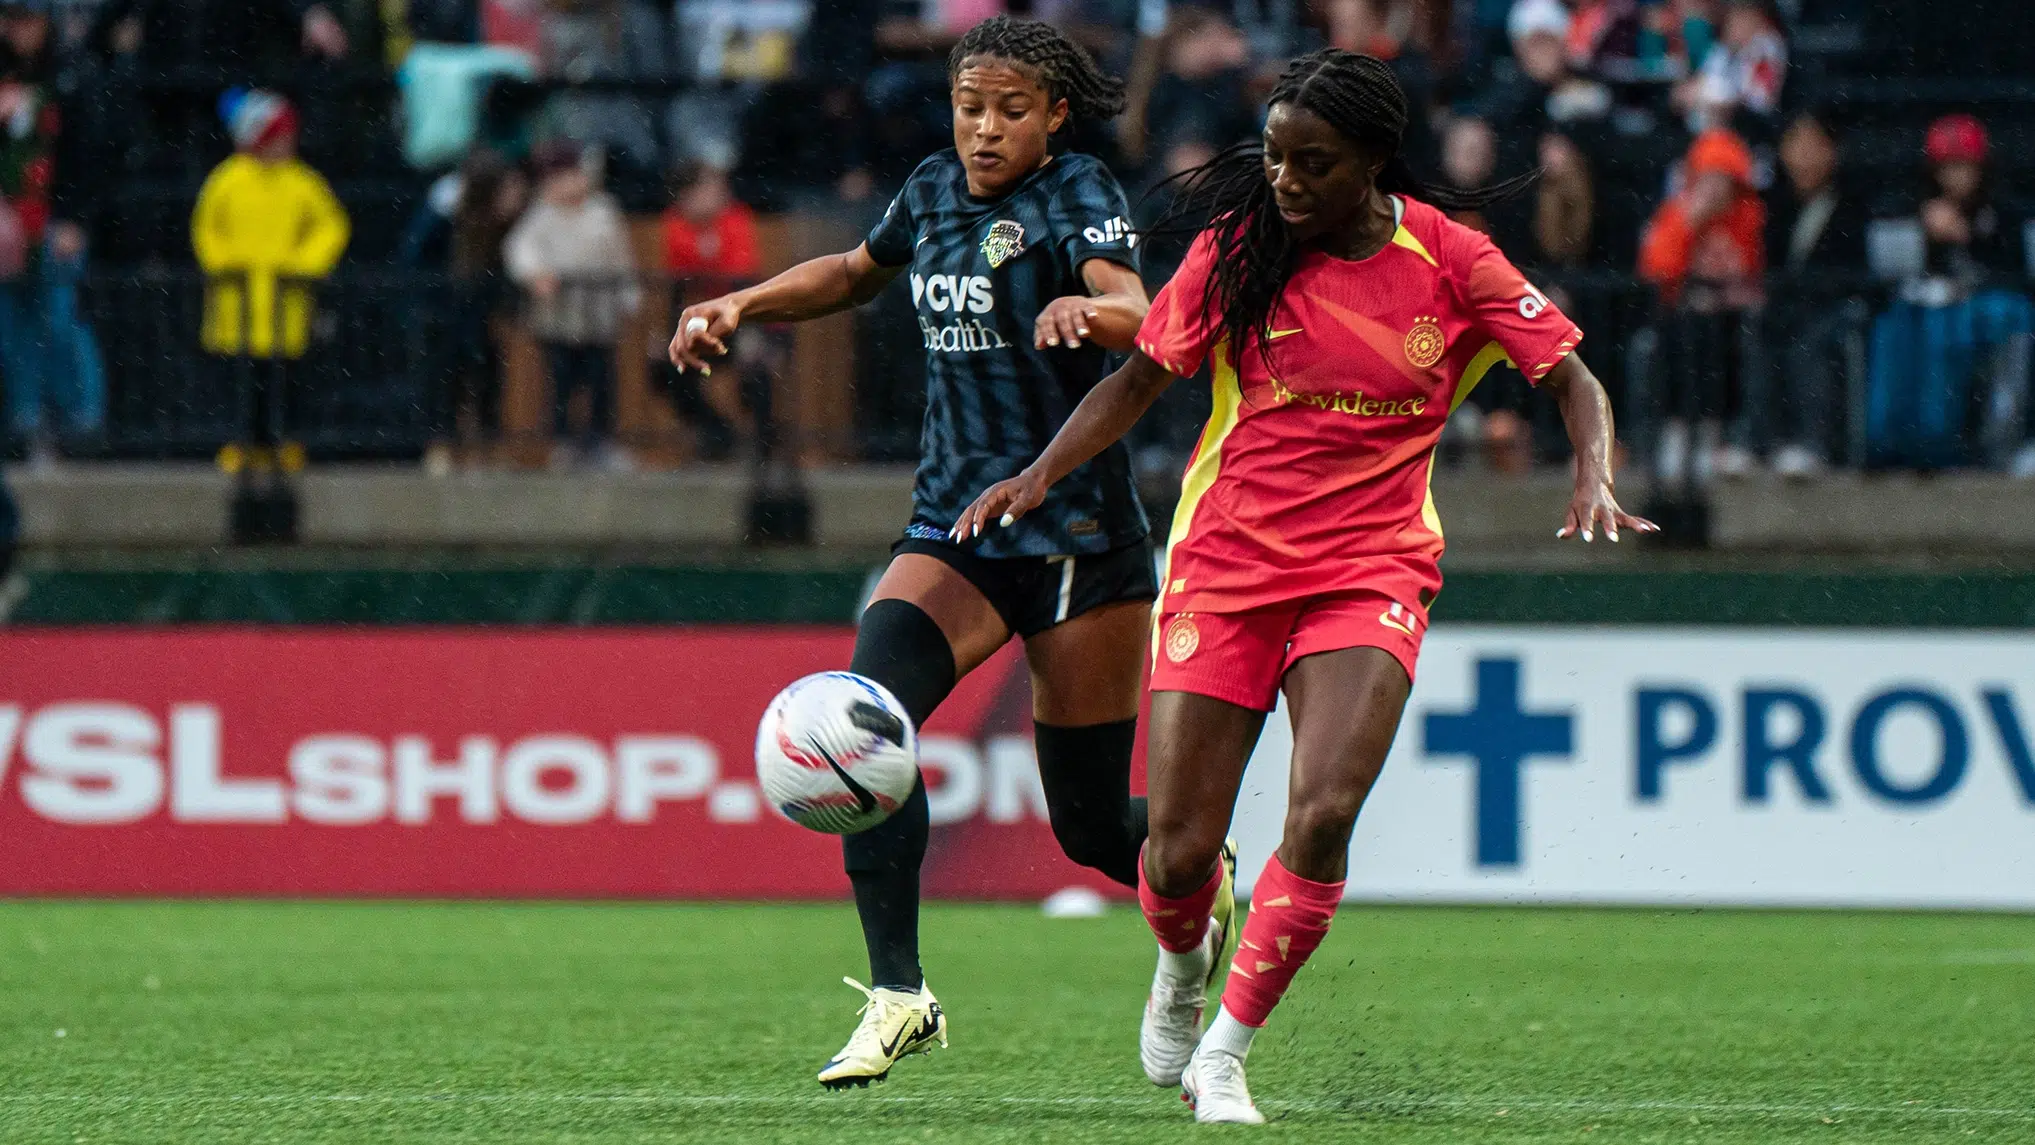 Croix Bethune dribbles the ball past a Thorns defender.